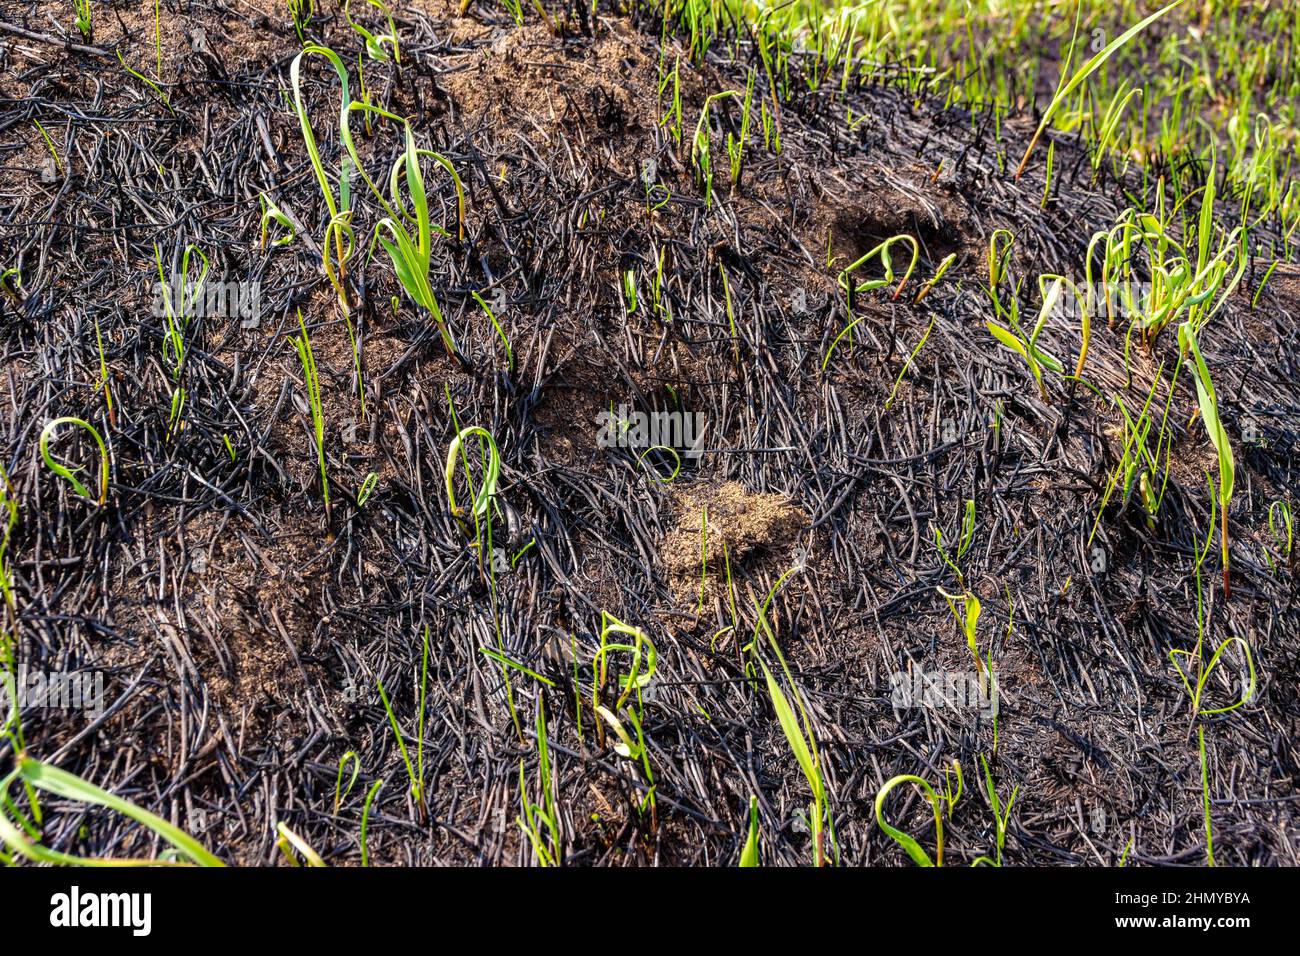 mink of a rodent that died in a field fire, scorched earth and scorched plant seeds around a hole in the ground, selective focus Stock Photo